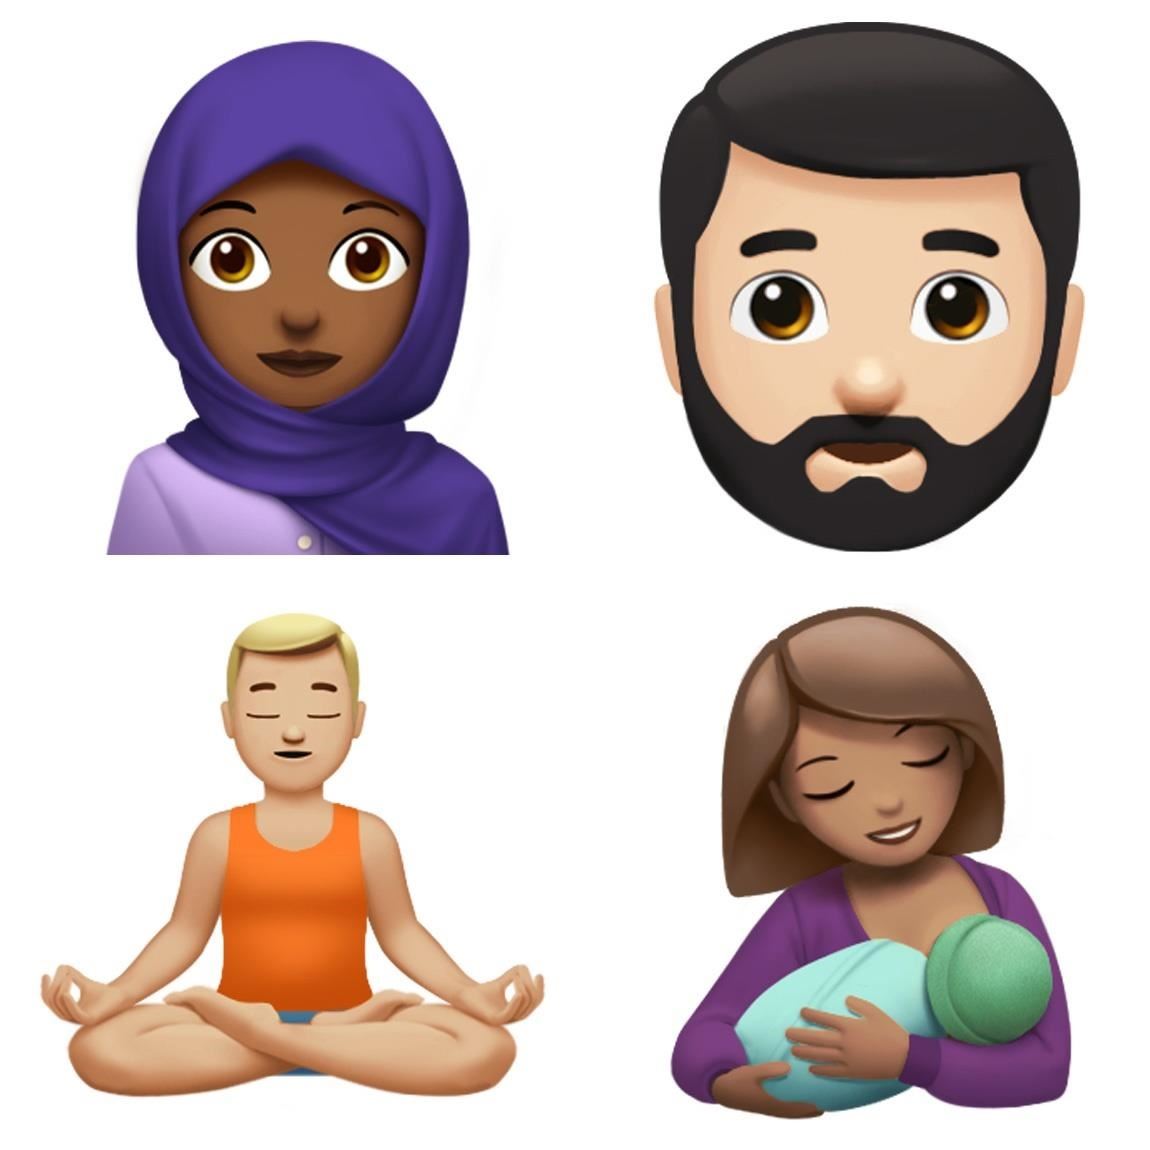 Today Is World Emoji Day & Apple's Giving Us All Gifts to Celebrate